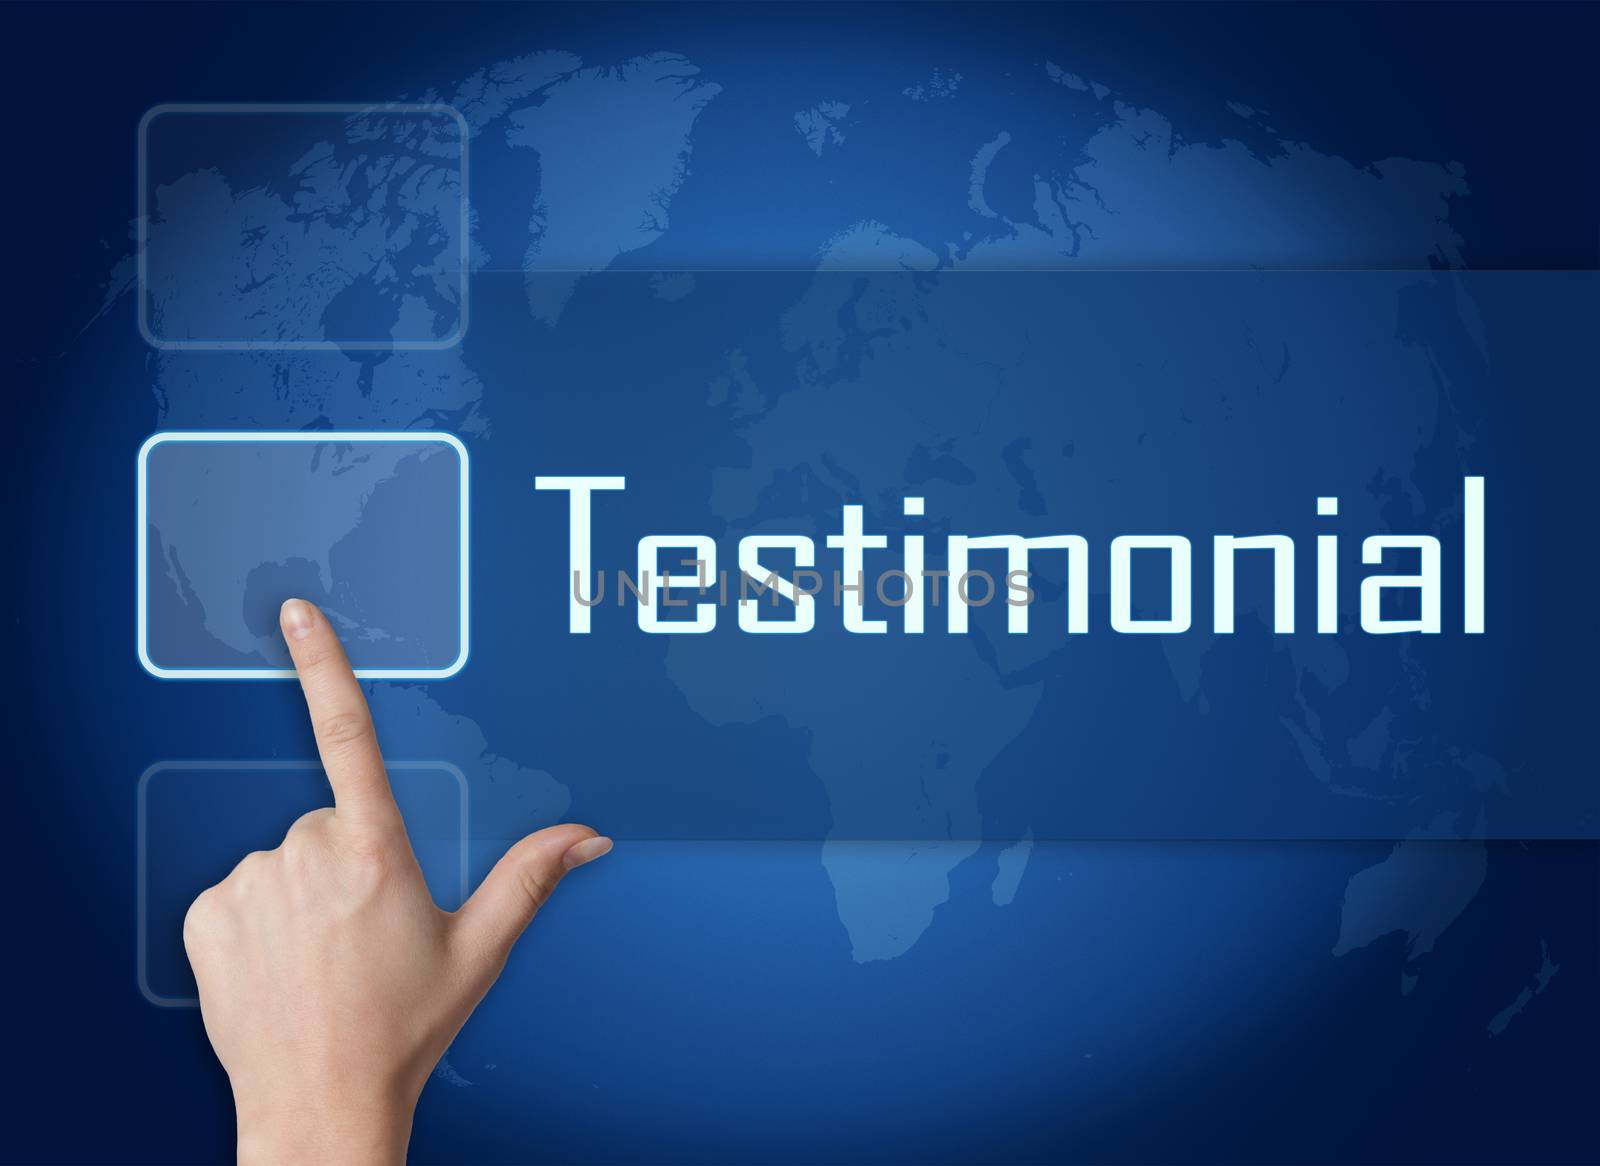 Testimonial concept with interface and world map on blue background